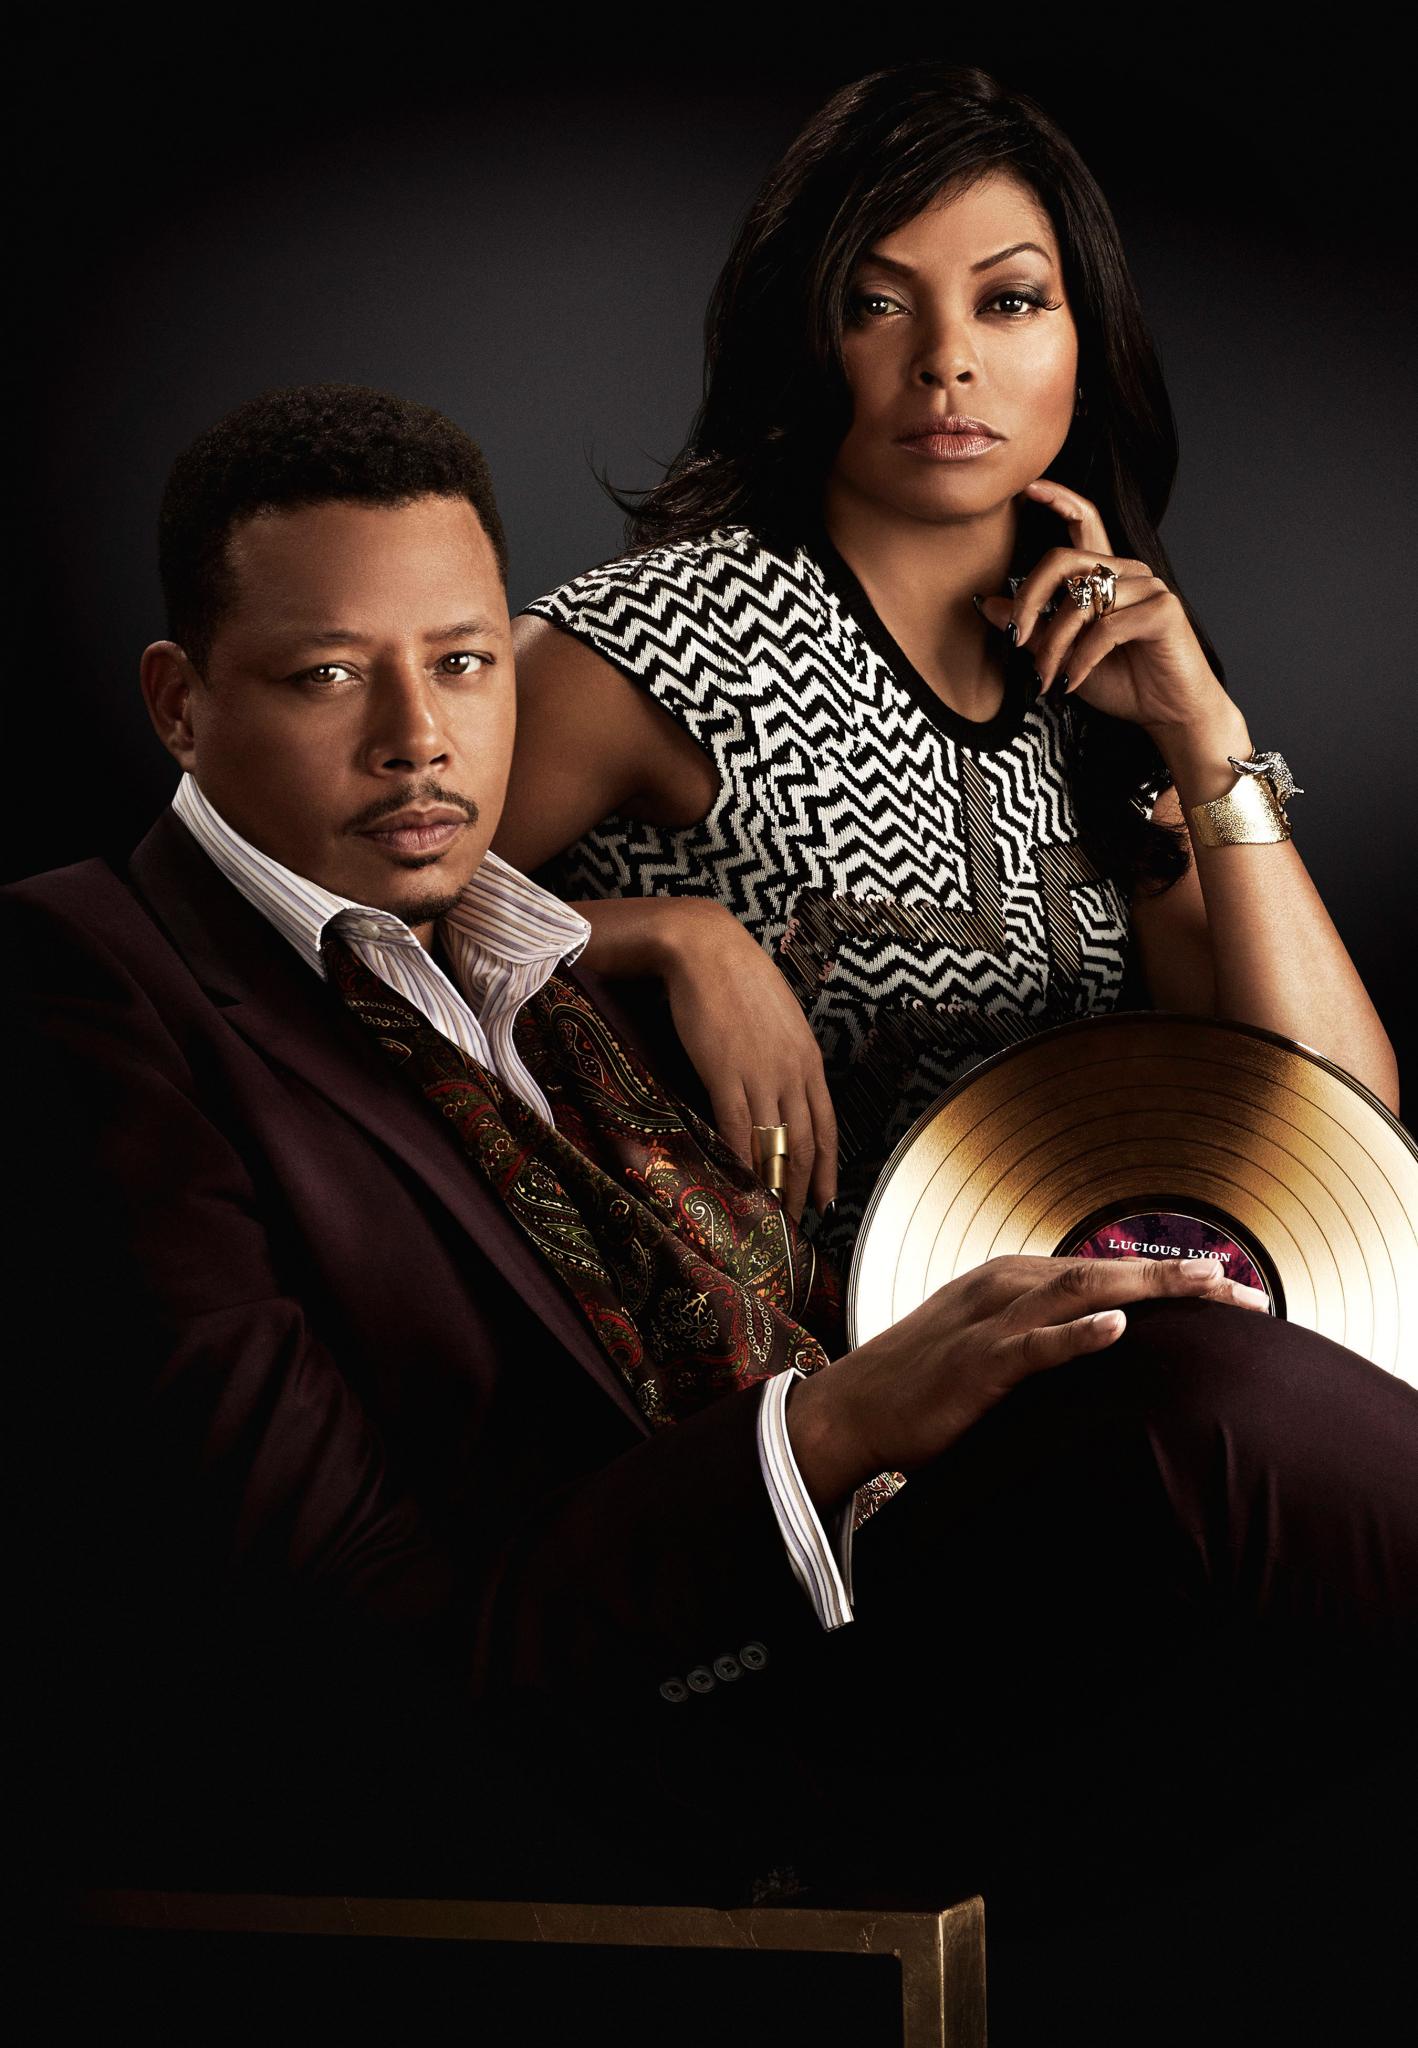 EXCLUSIVE: 'Empire's' Cookie And Lucious Have One Of TV's Most Tumultuous Love Stories 
